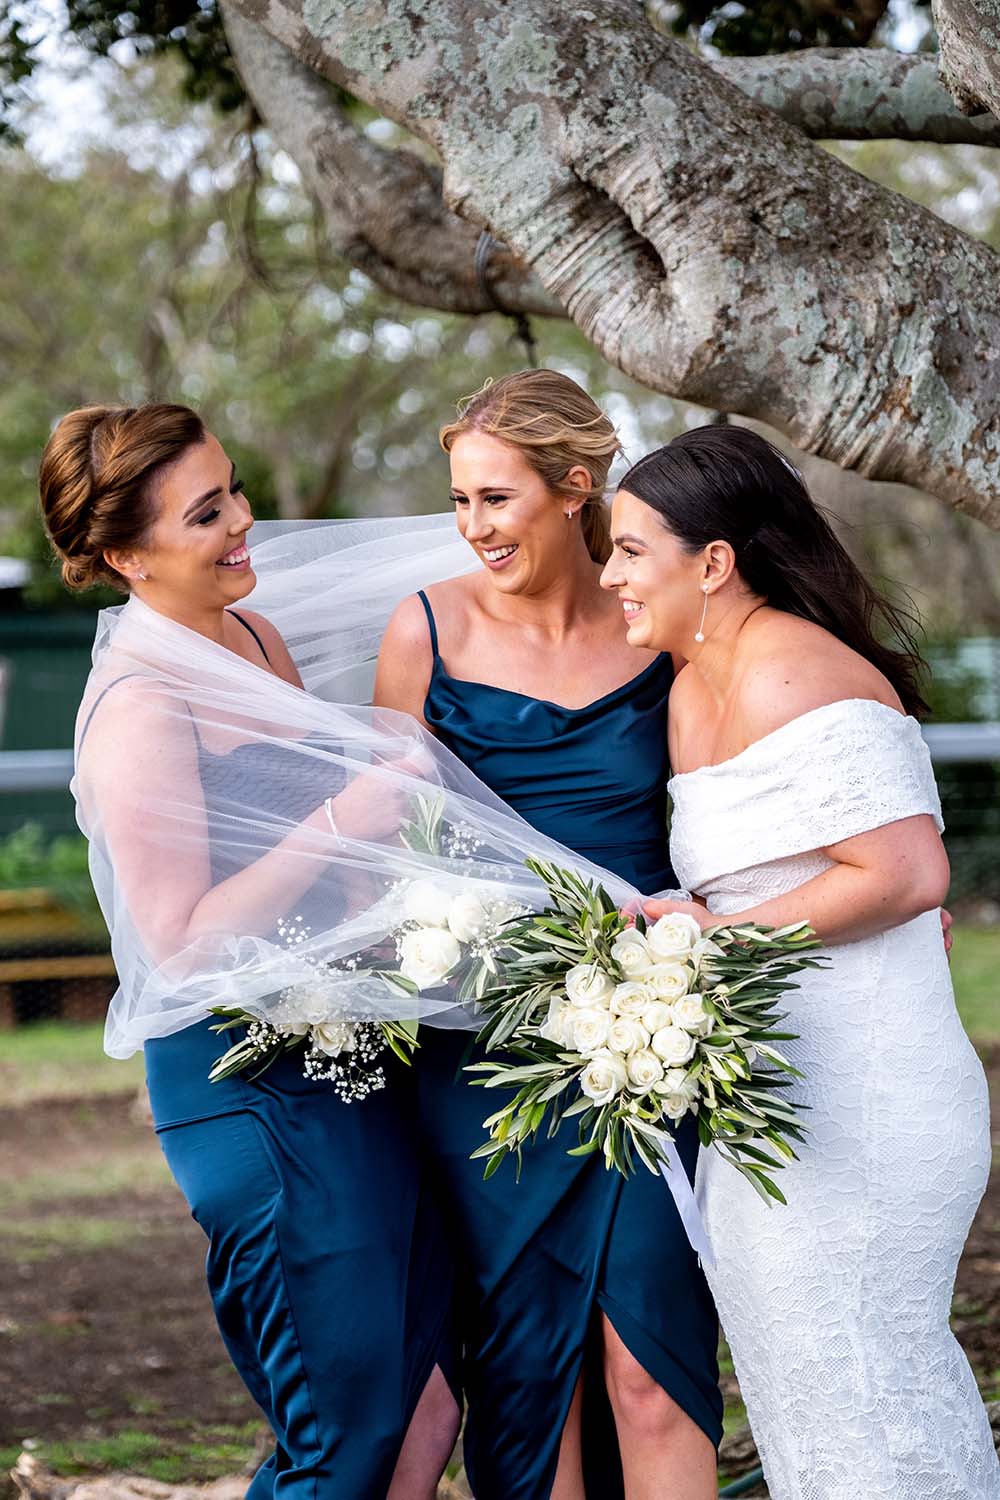 Wedding Photography - Bridesmaids wrapped in brides veil